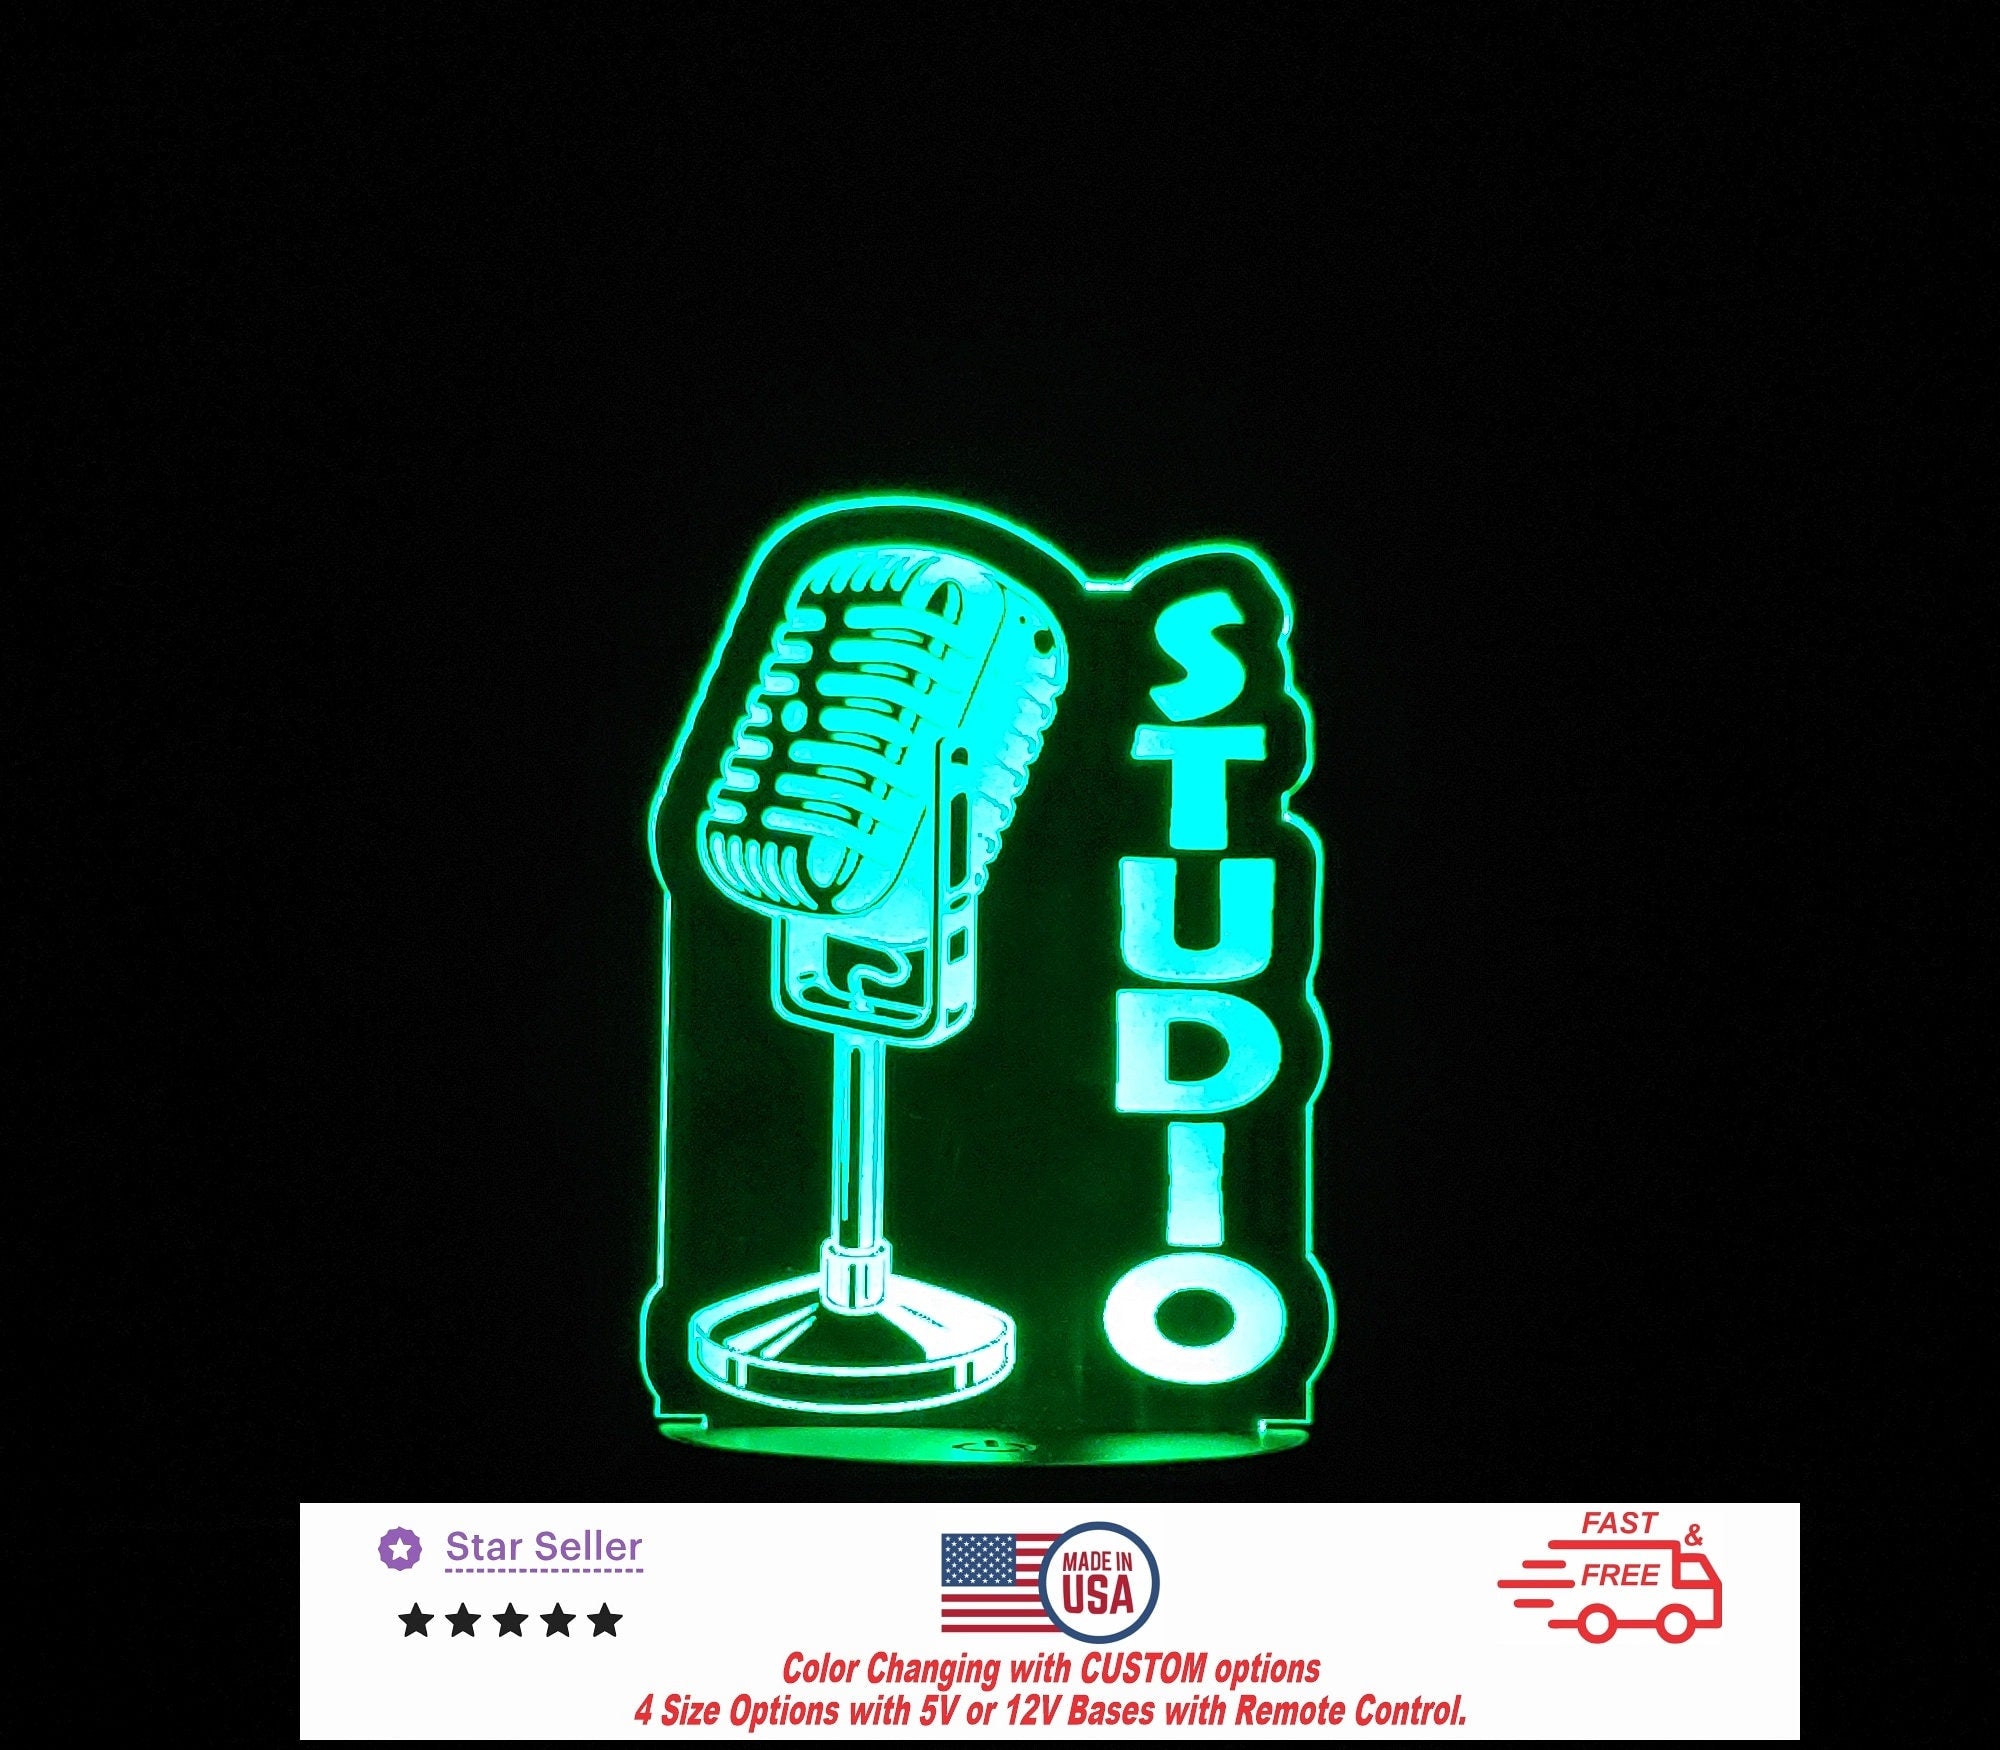 Music Studio Recording Vintage Microphone Personalized LED Night Light - Neon sign, Room Decor, Stream, 4 sizes Free Shipping Made in USA